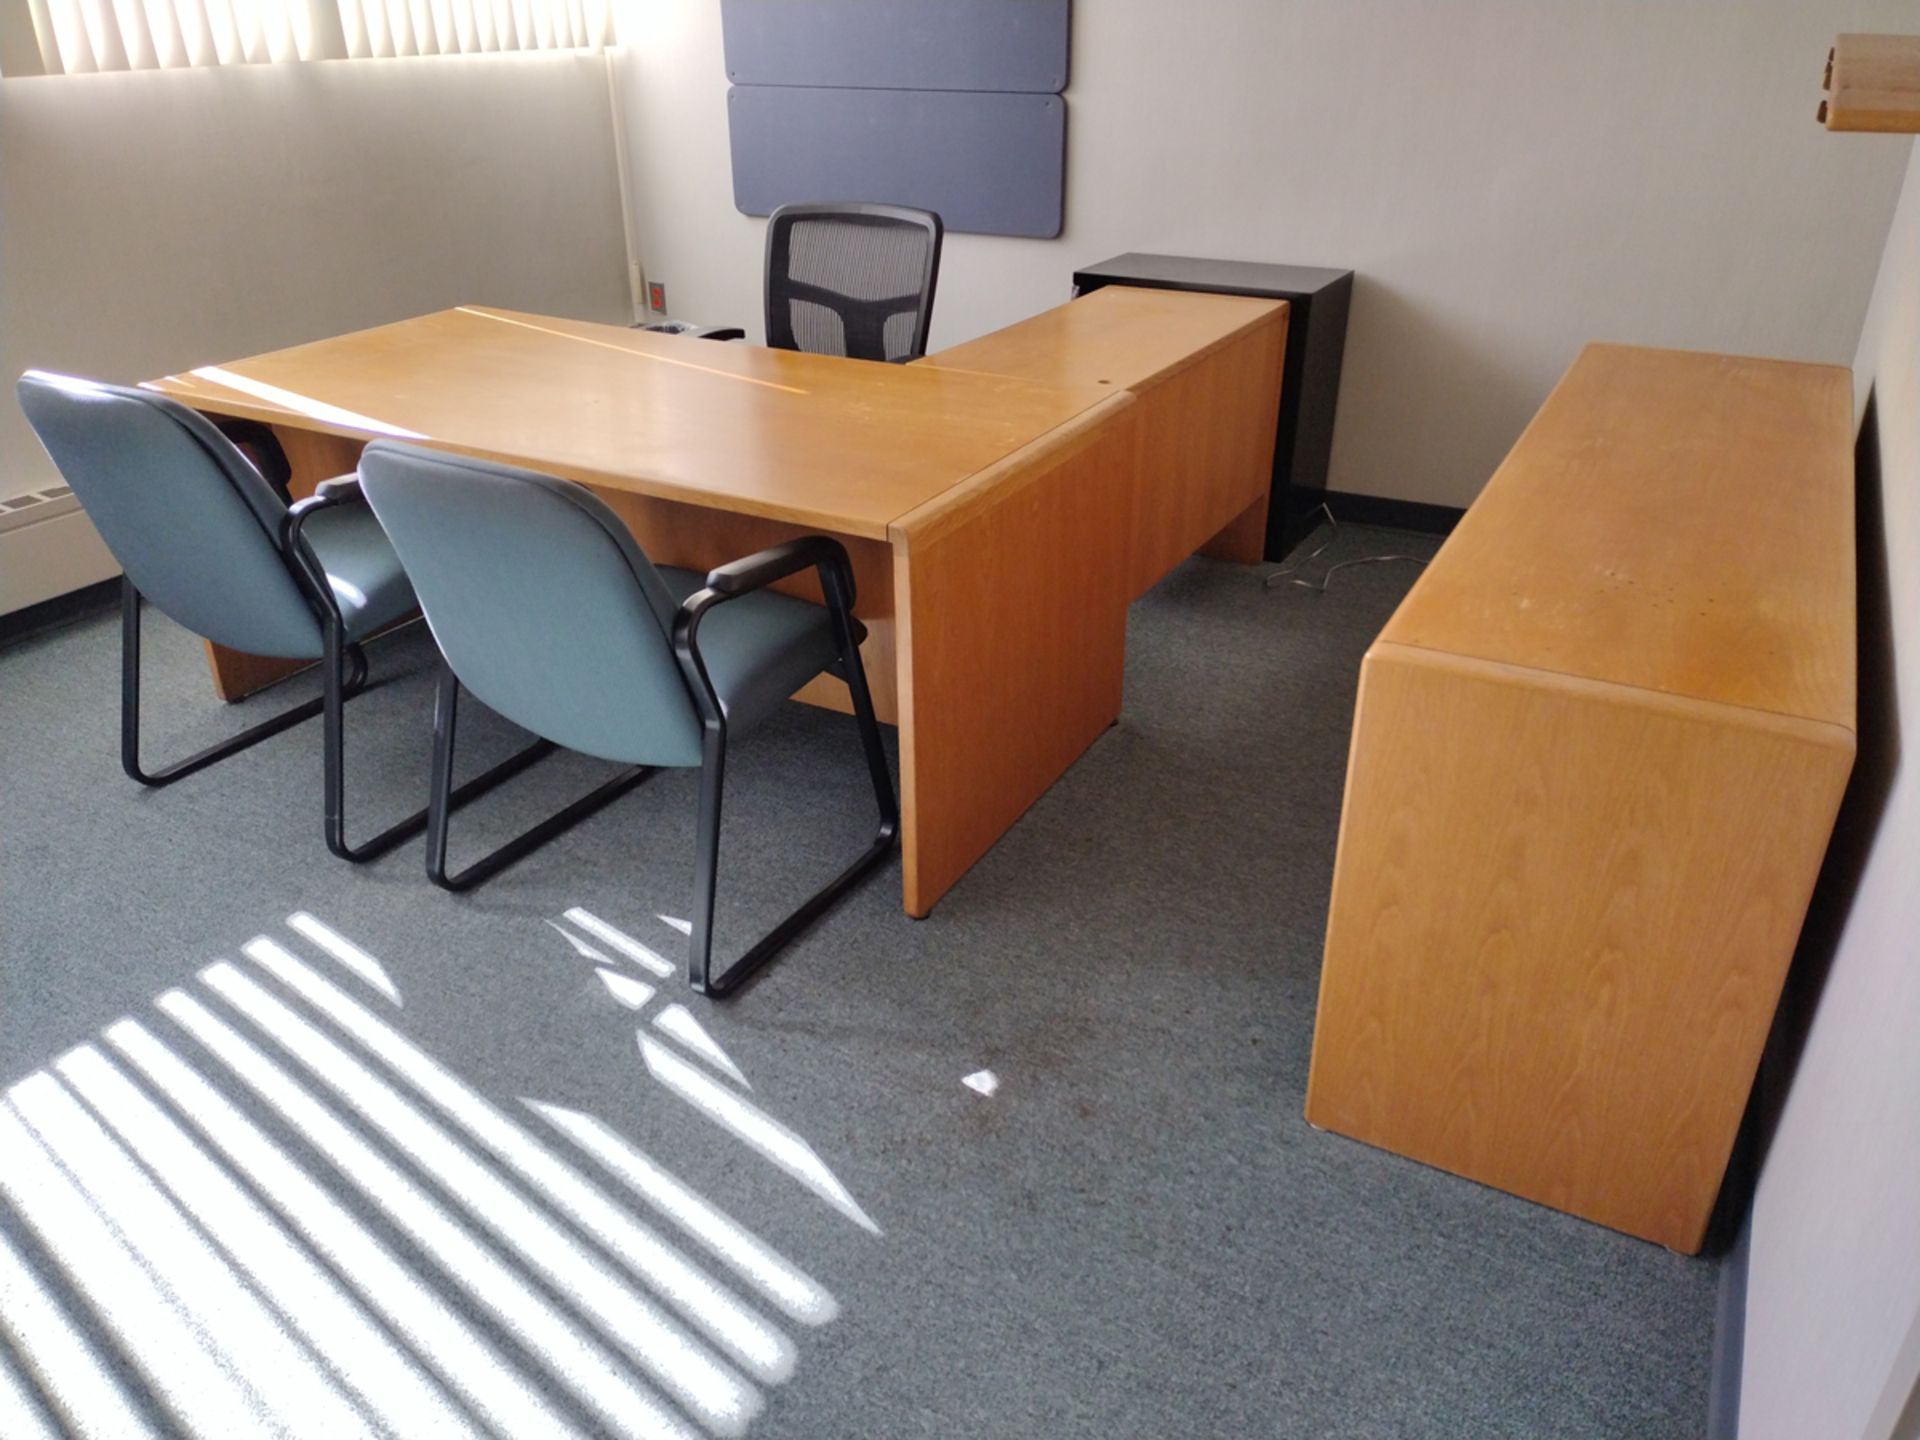 Group of Office Furniture Throughout Rooms - Image 4 of 8